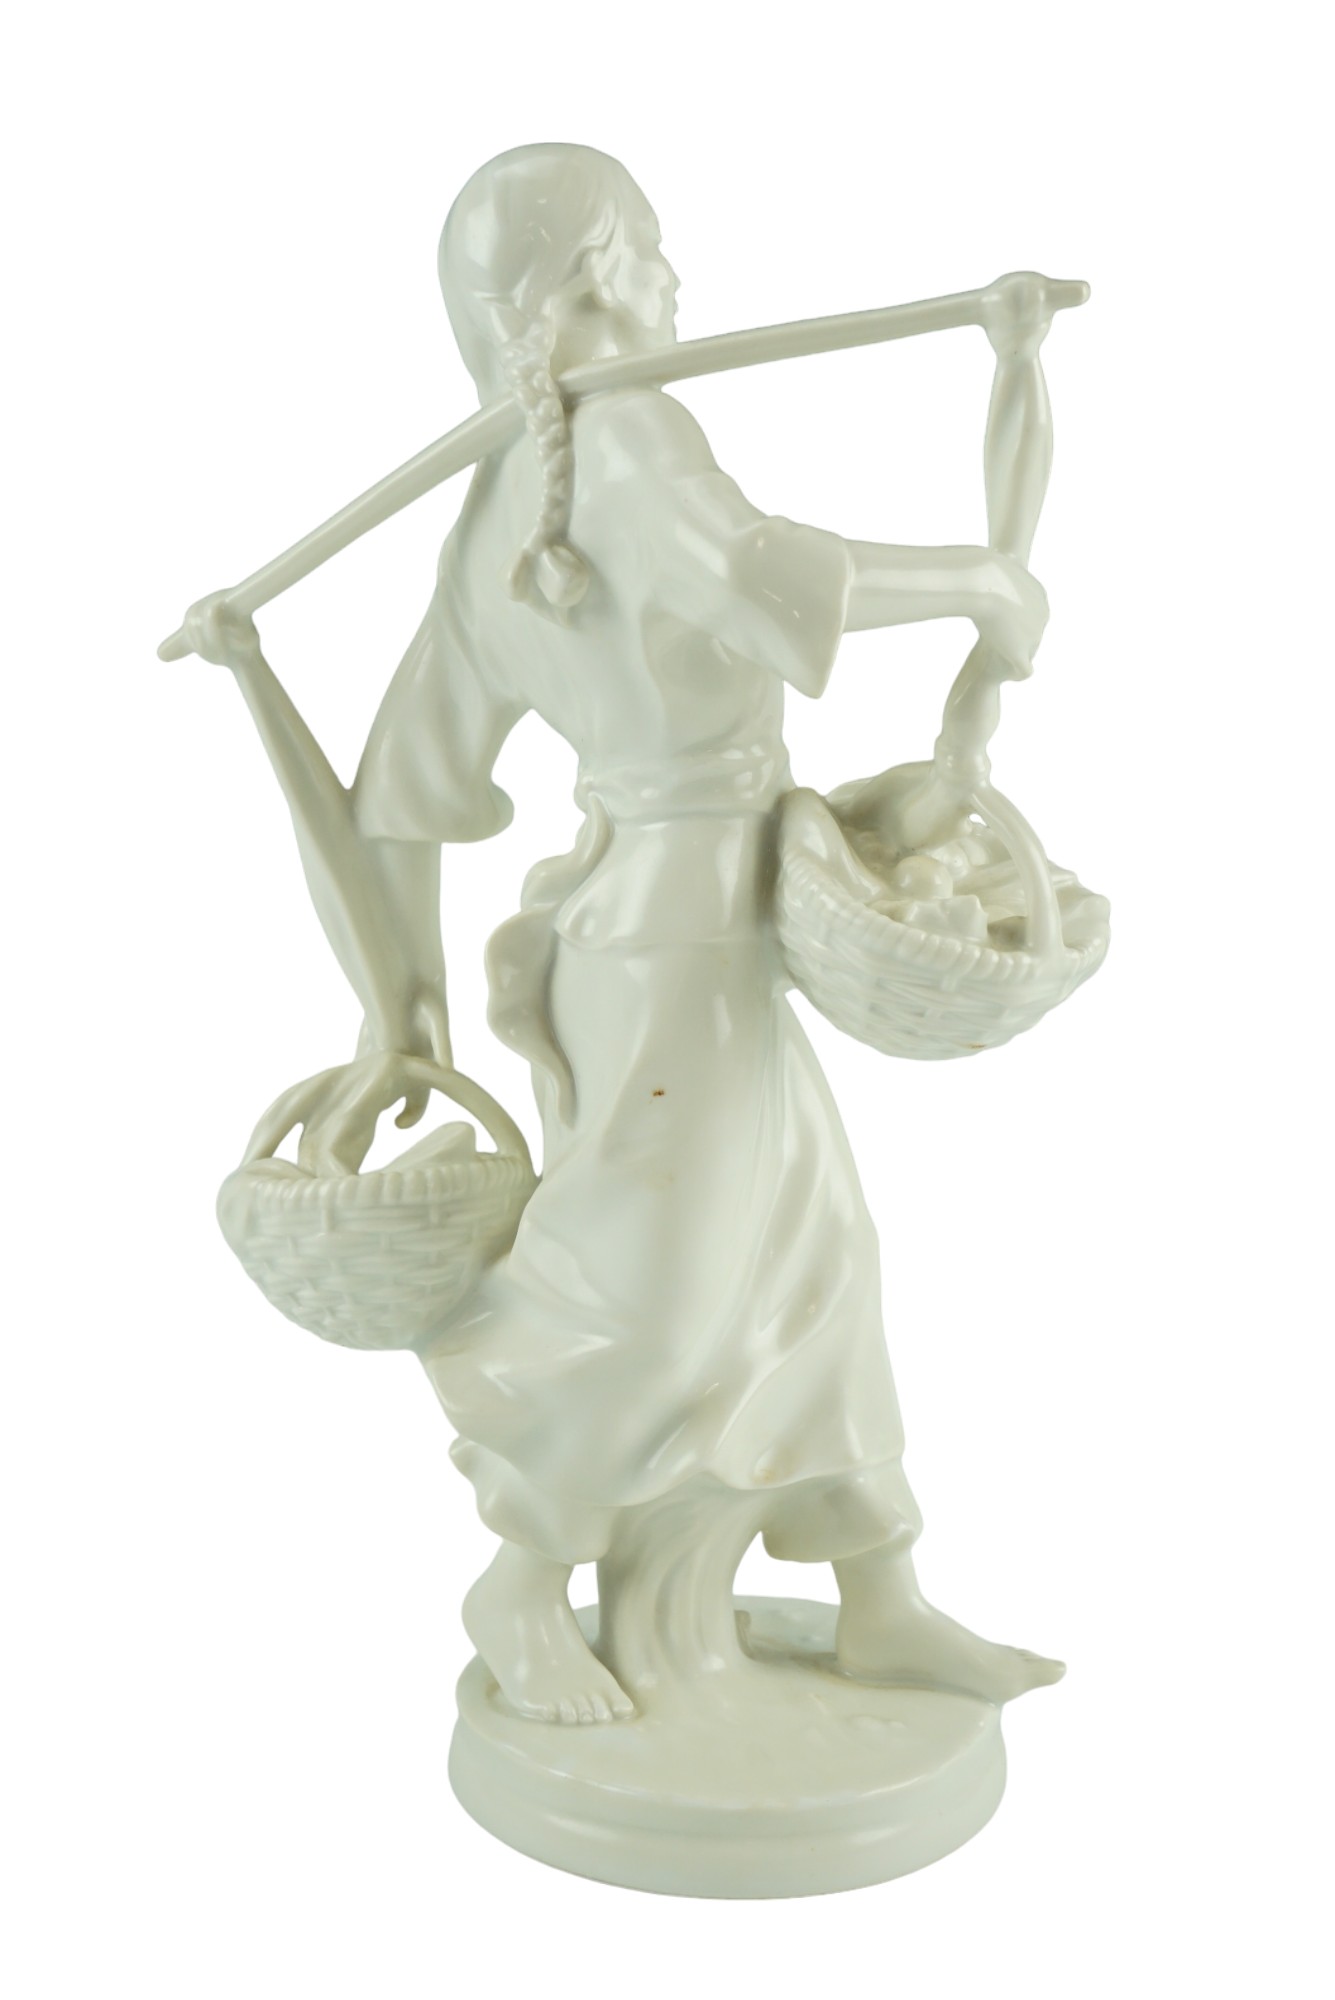 A Meissen Weifs blanc-de-chine figurine of a Korean girl carrying fruit baskets, designed by Max - Image 3 of 6